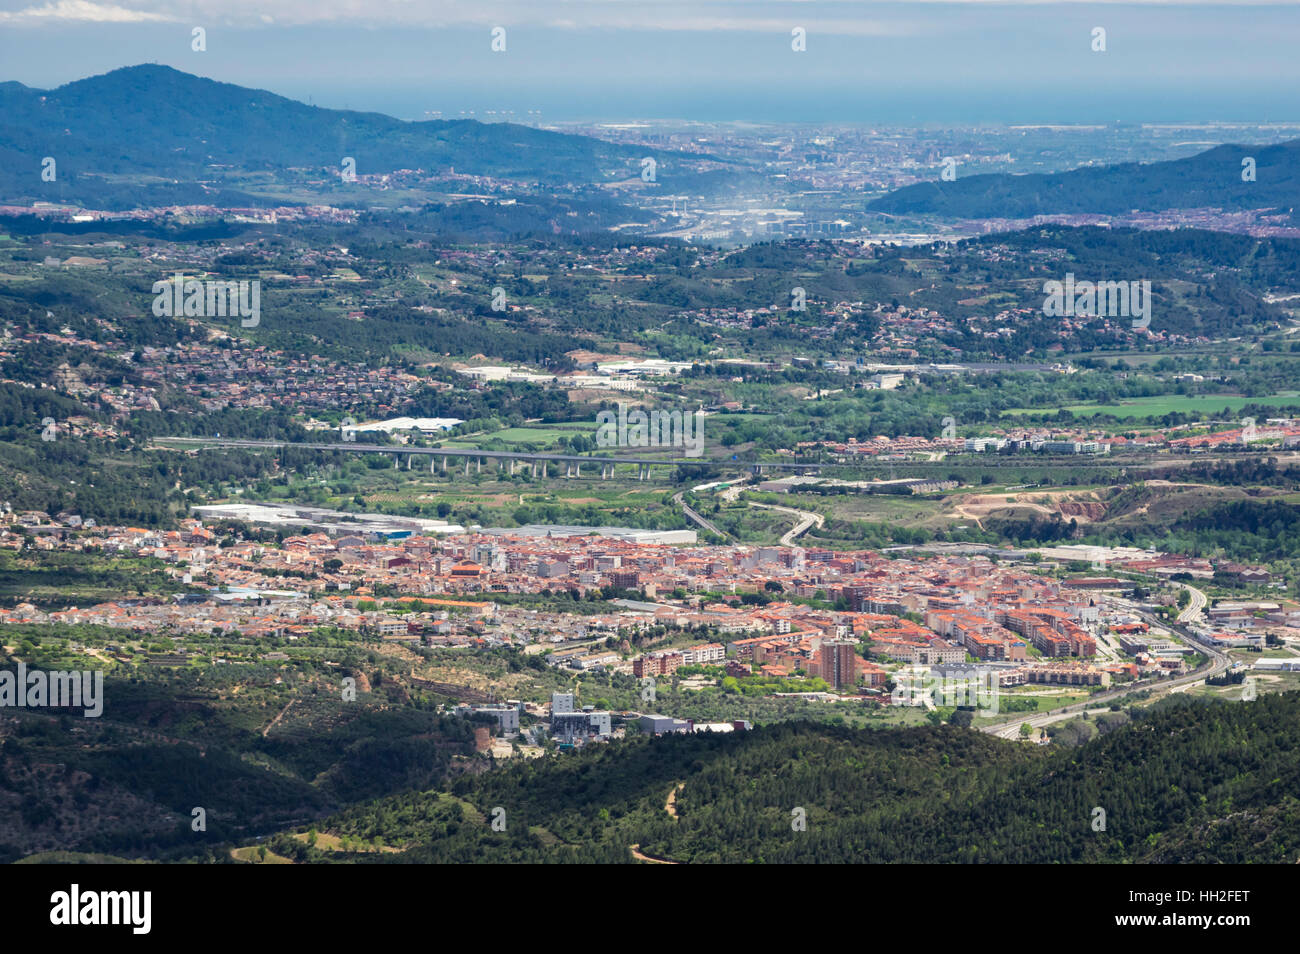 View from Montserrat mountains to the town of Olesa de Montserrat. Province of Barcelona, Catalonia, Spain. Stock Photo